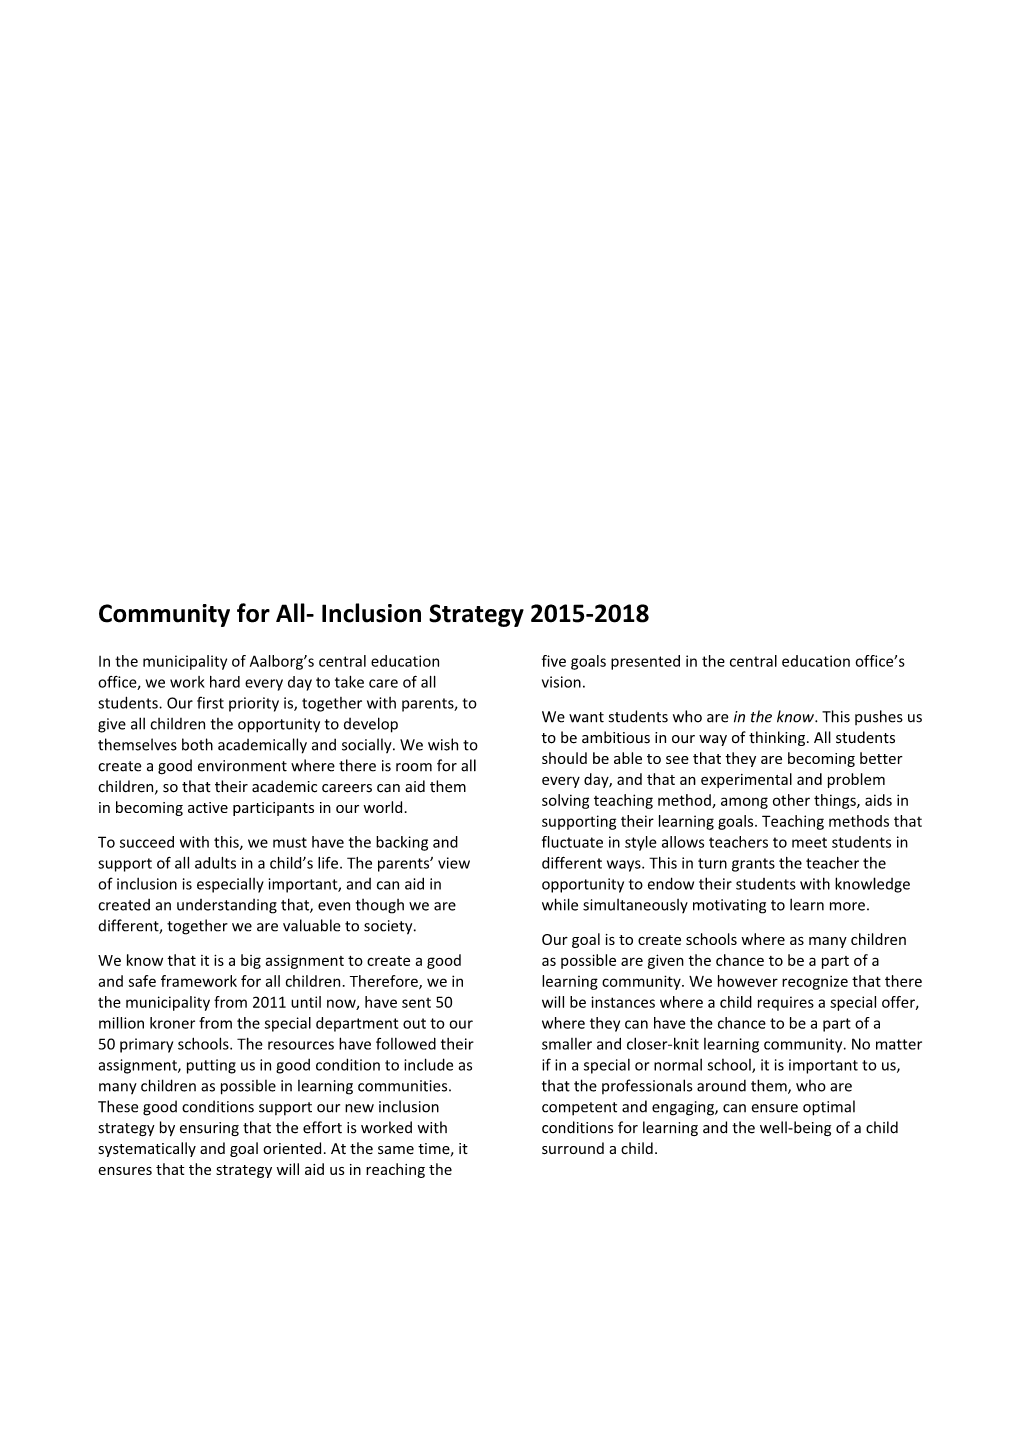 Community for All- Inclusion Strategy 2015-2018